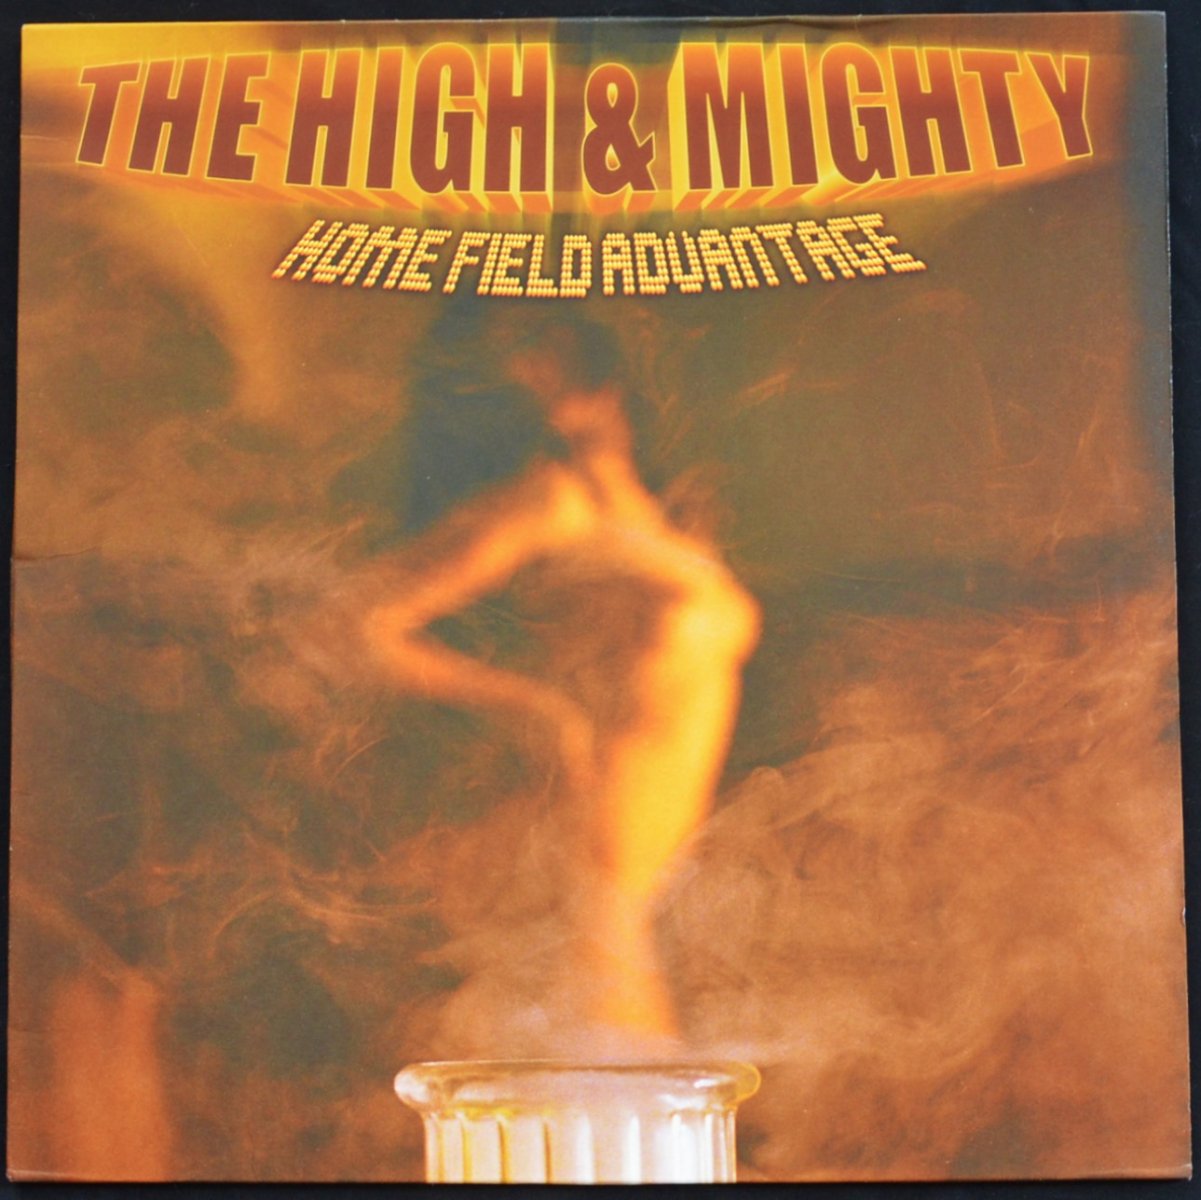 THE HIGH & MIGHTY / HOME FIELD ADVANTAGE (2LP)